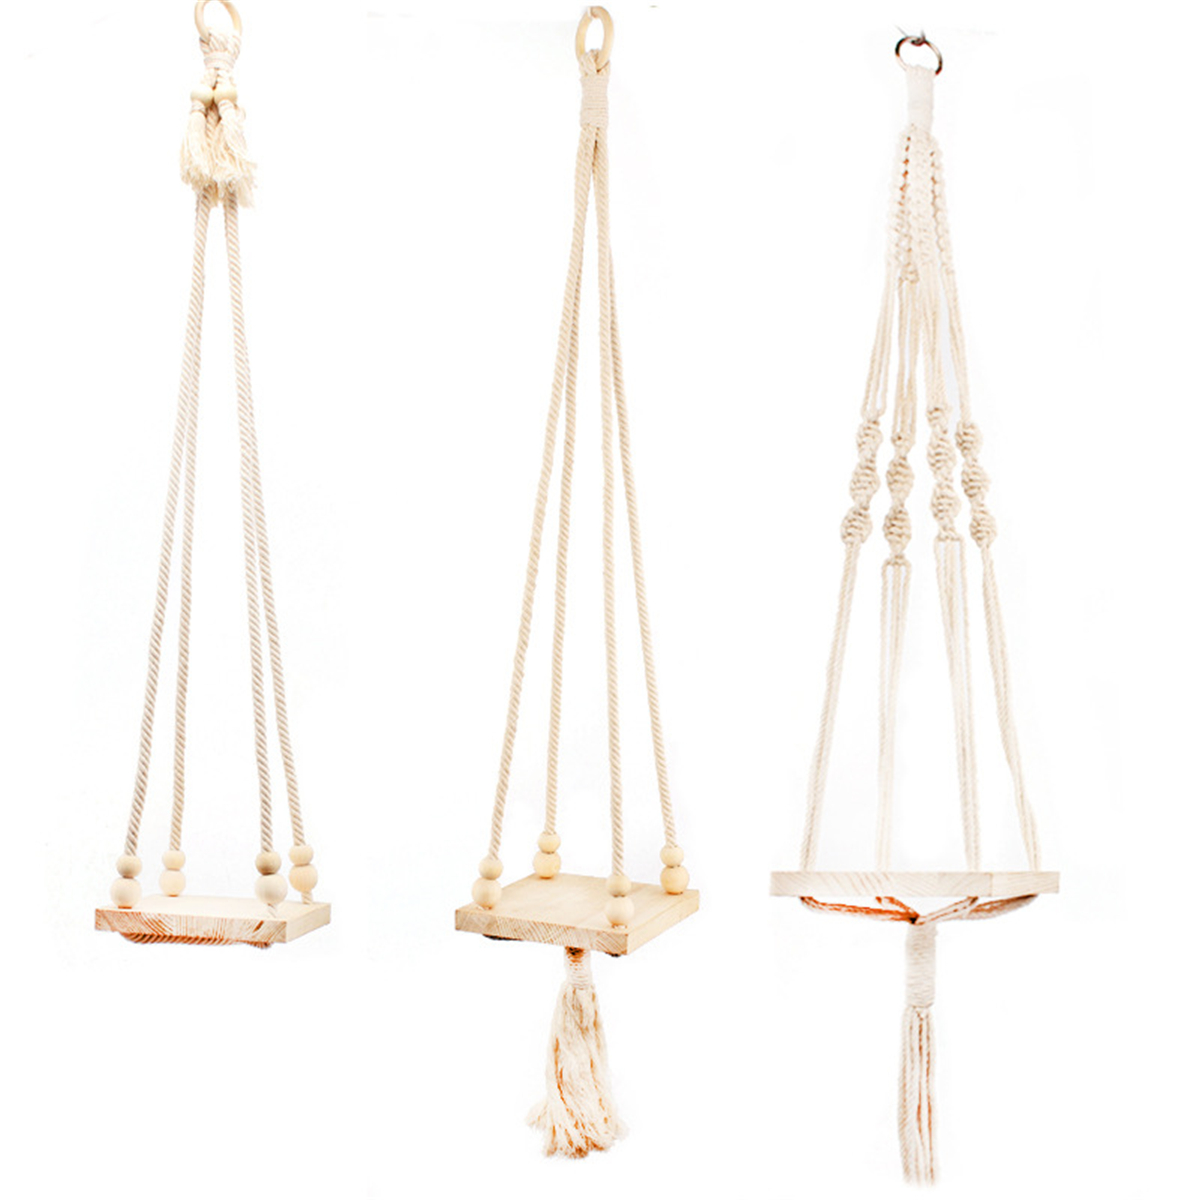 Braided-Rope-Hanging-Planter-Macrame-Plant-Flower-Pot-Holder-Indoor-Outdoor-Decorations-1475670-8